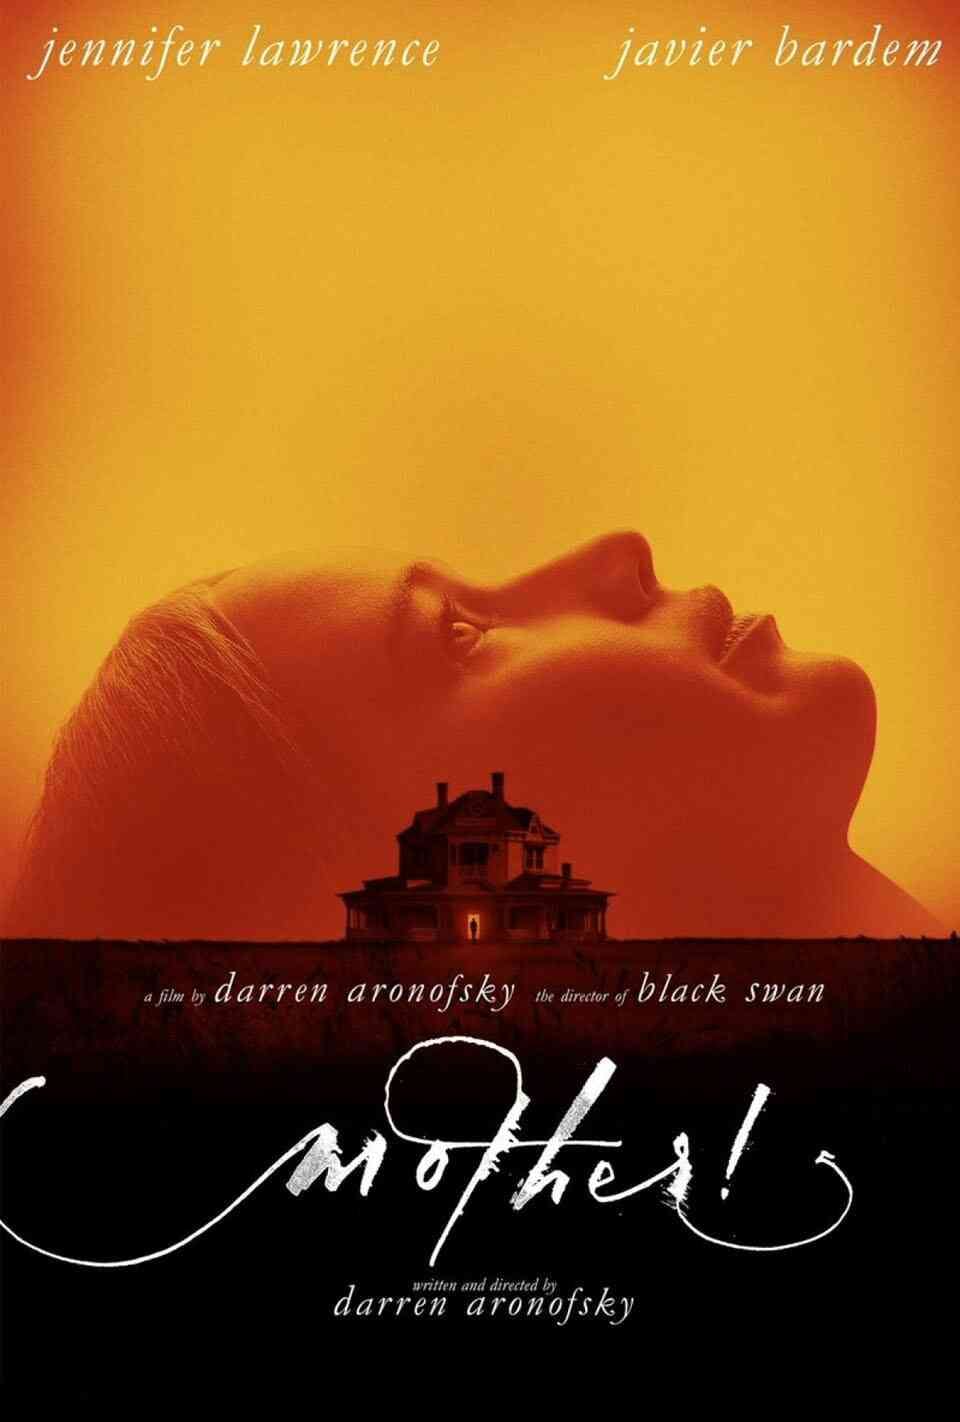 Read mother! screenplay.